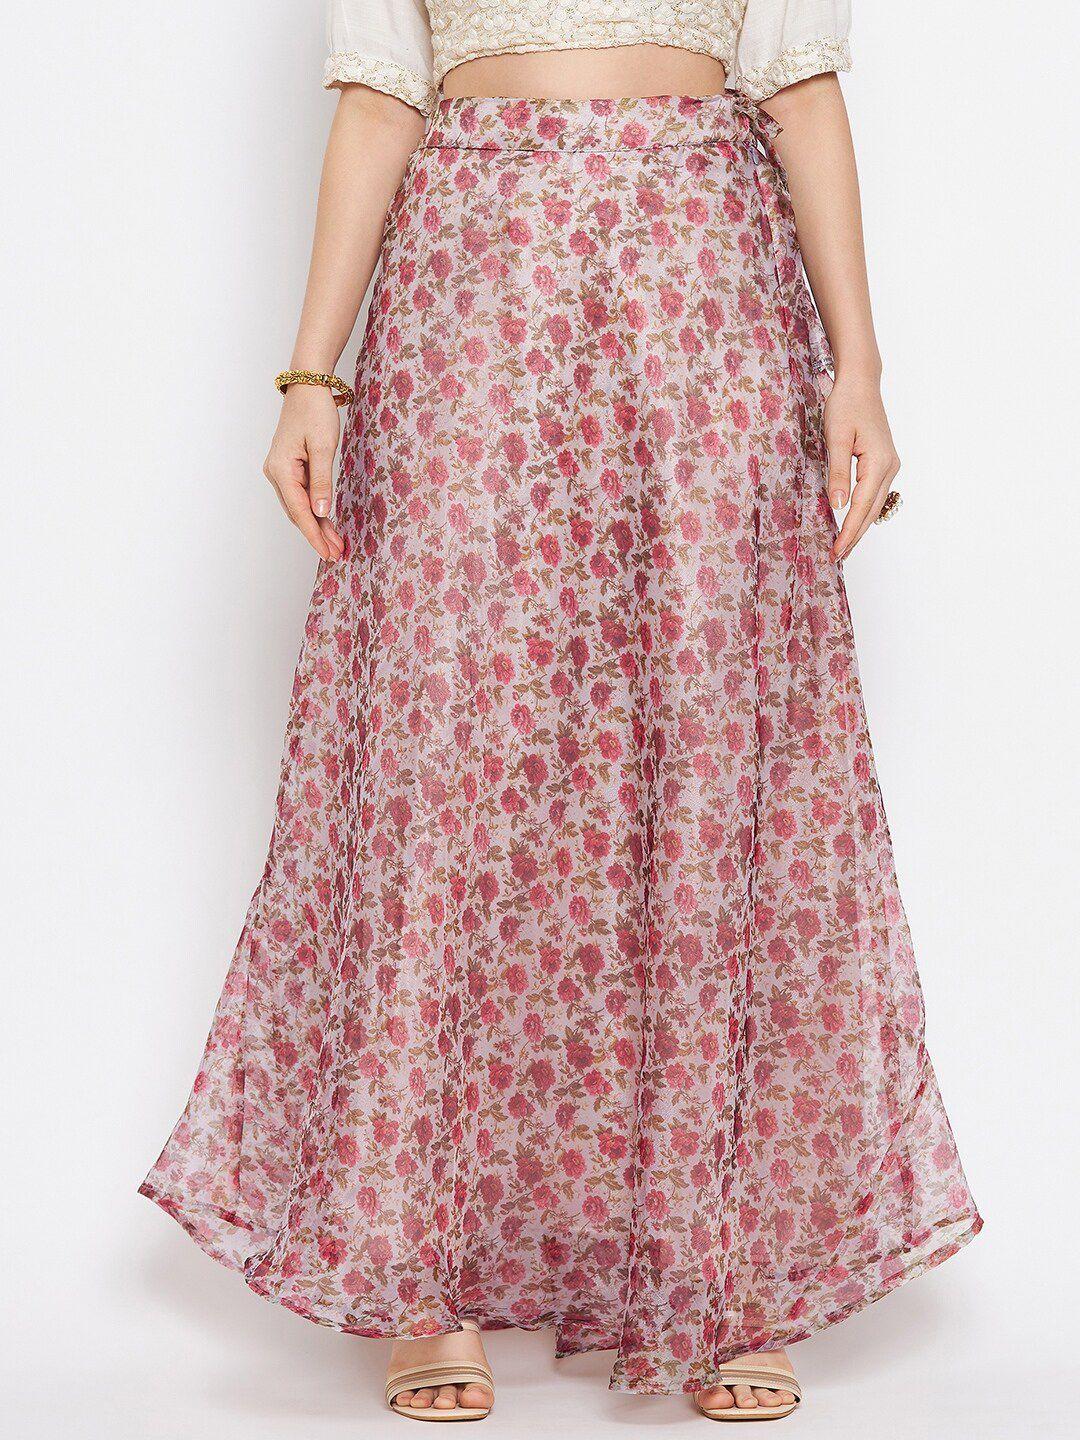 clora-creation-women-white-&-pink-floral-printed-flared-skirt